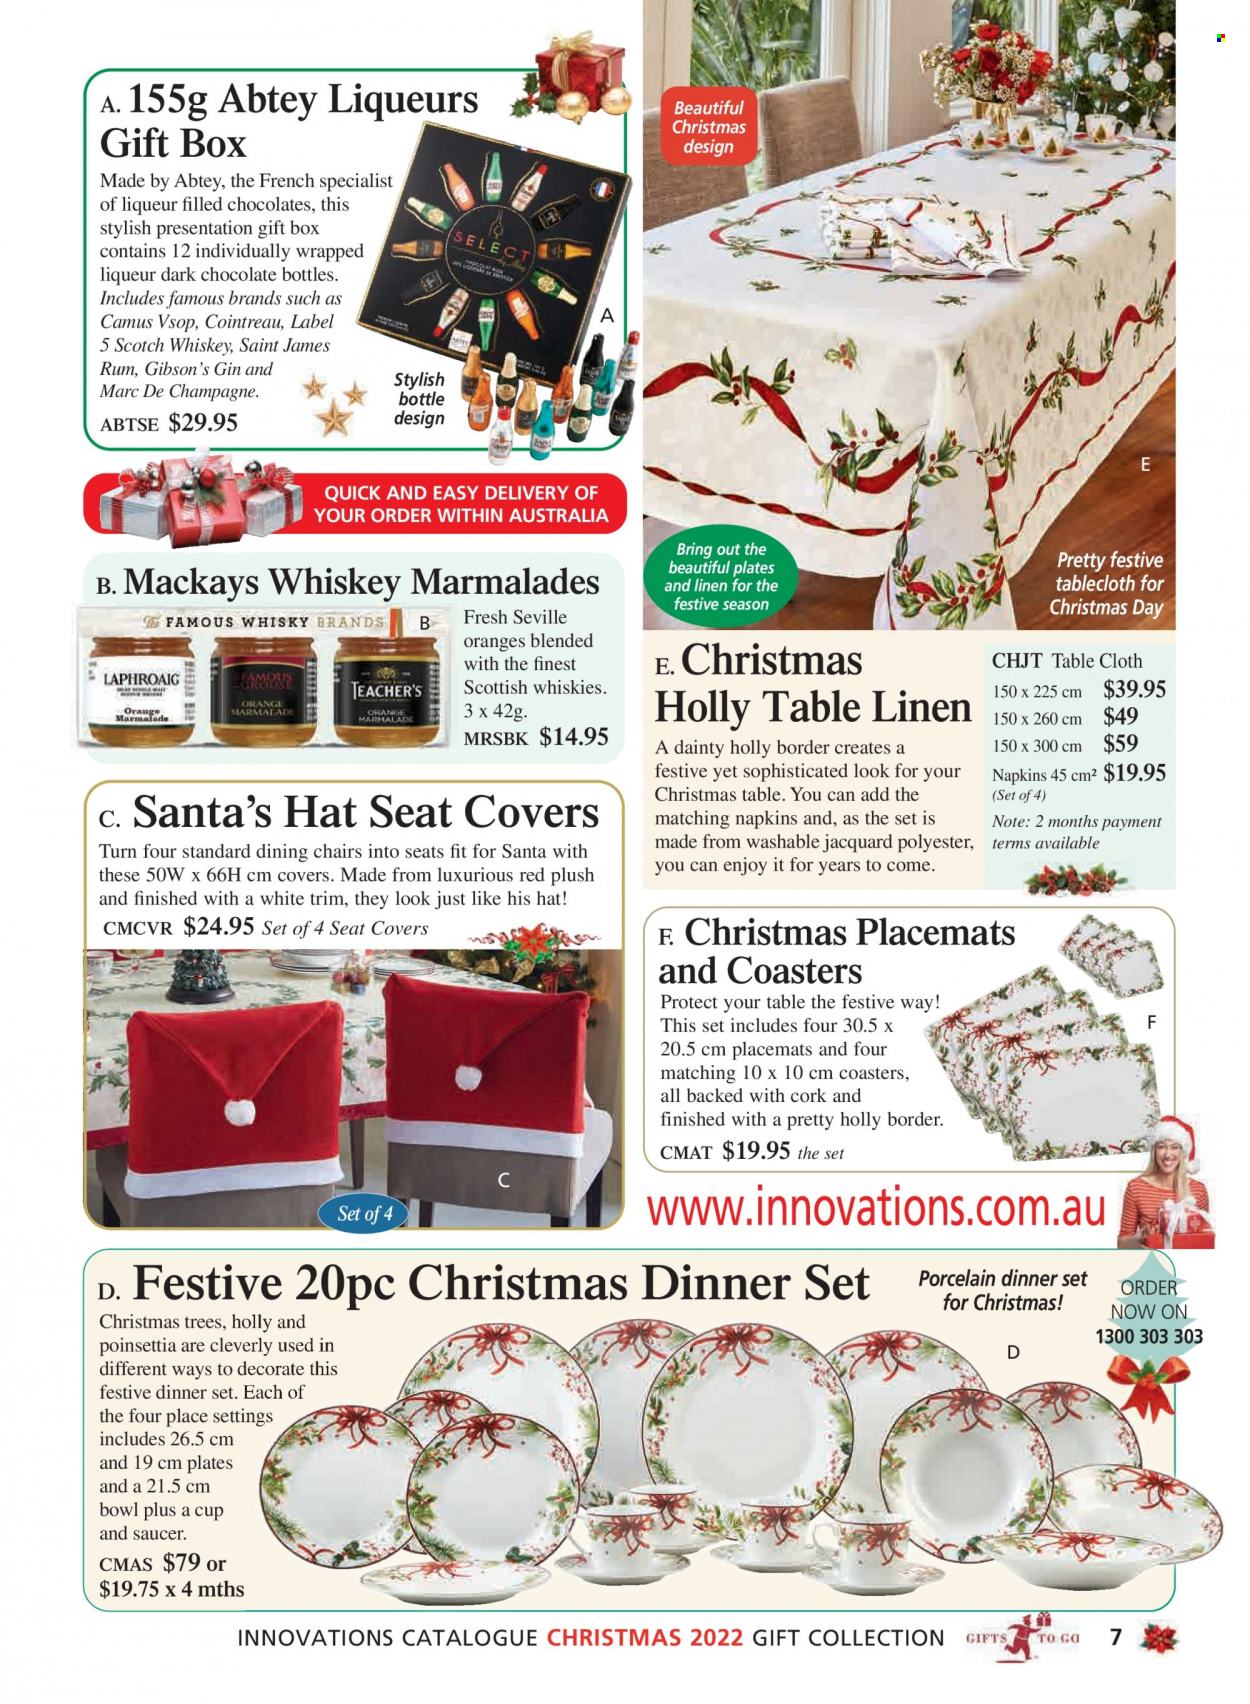 thumbnail - Innovations Catalogue - Sales products - dinnerware set, plate, saucer, bowl, gift box, tablecloth, napkins, placemat, linens, hat. Page 7.